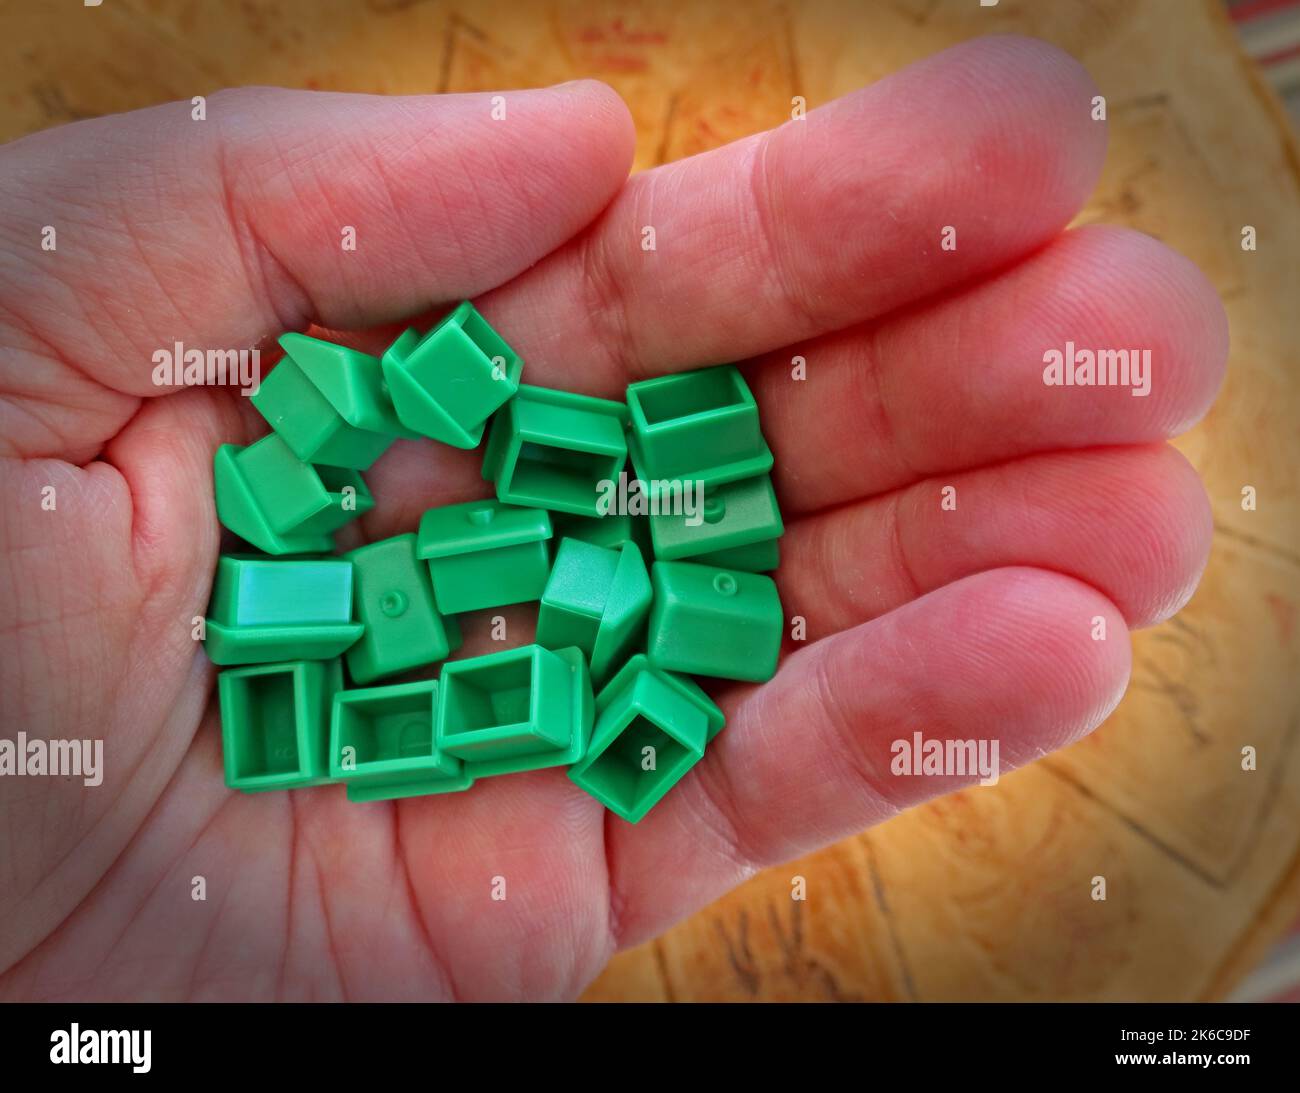 An adult hand, holding green Monopoly houses for rent or by, representing property and UK Housing issues Stock Photo